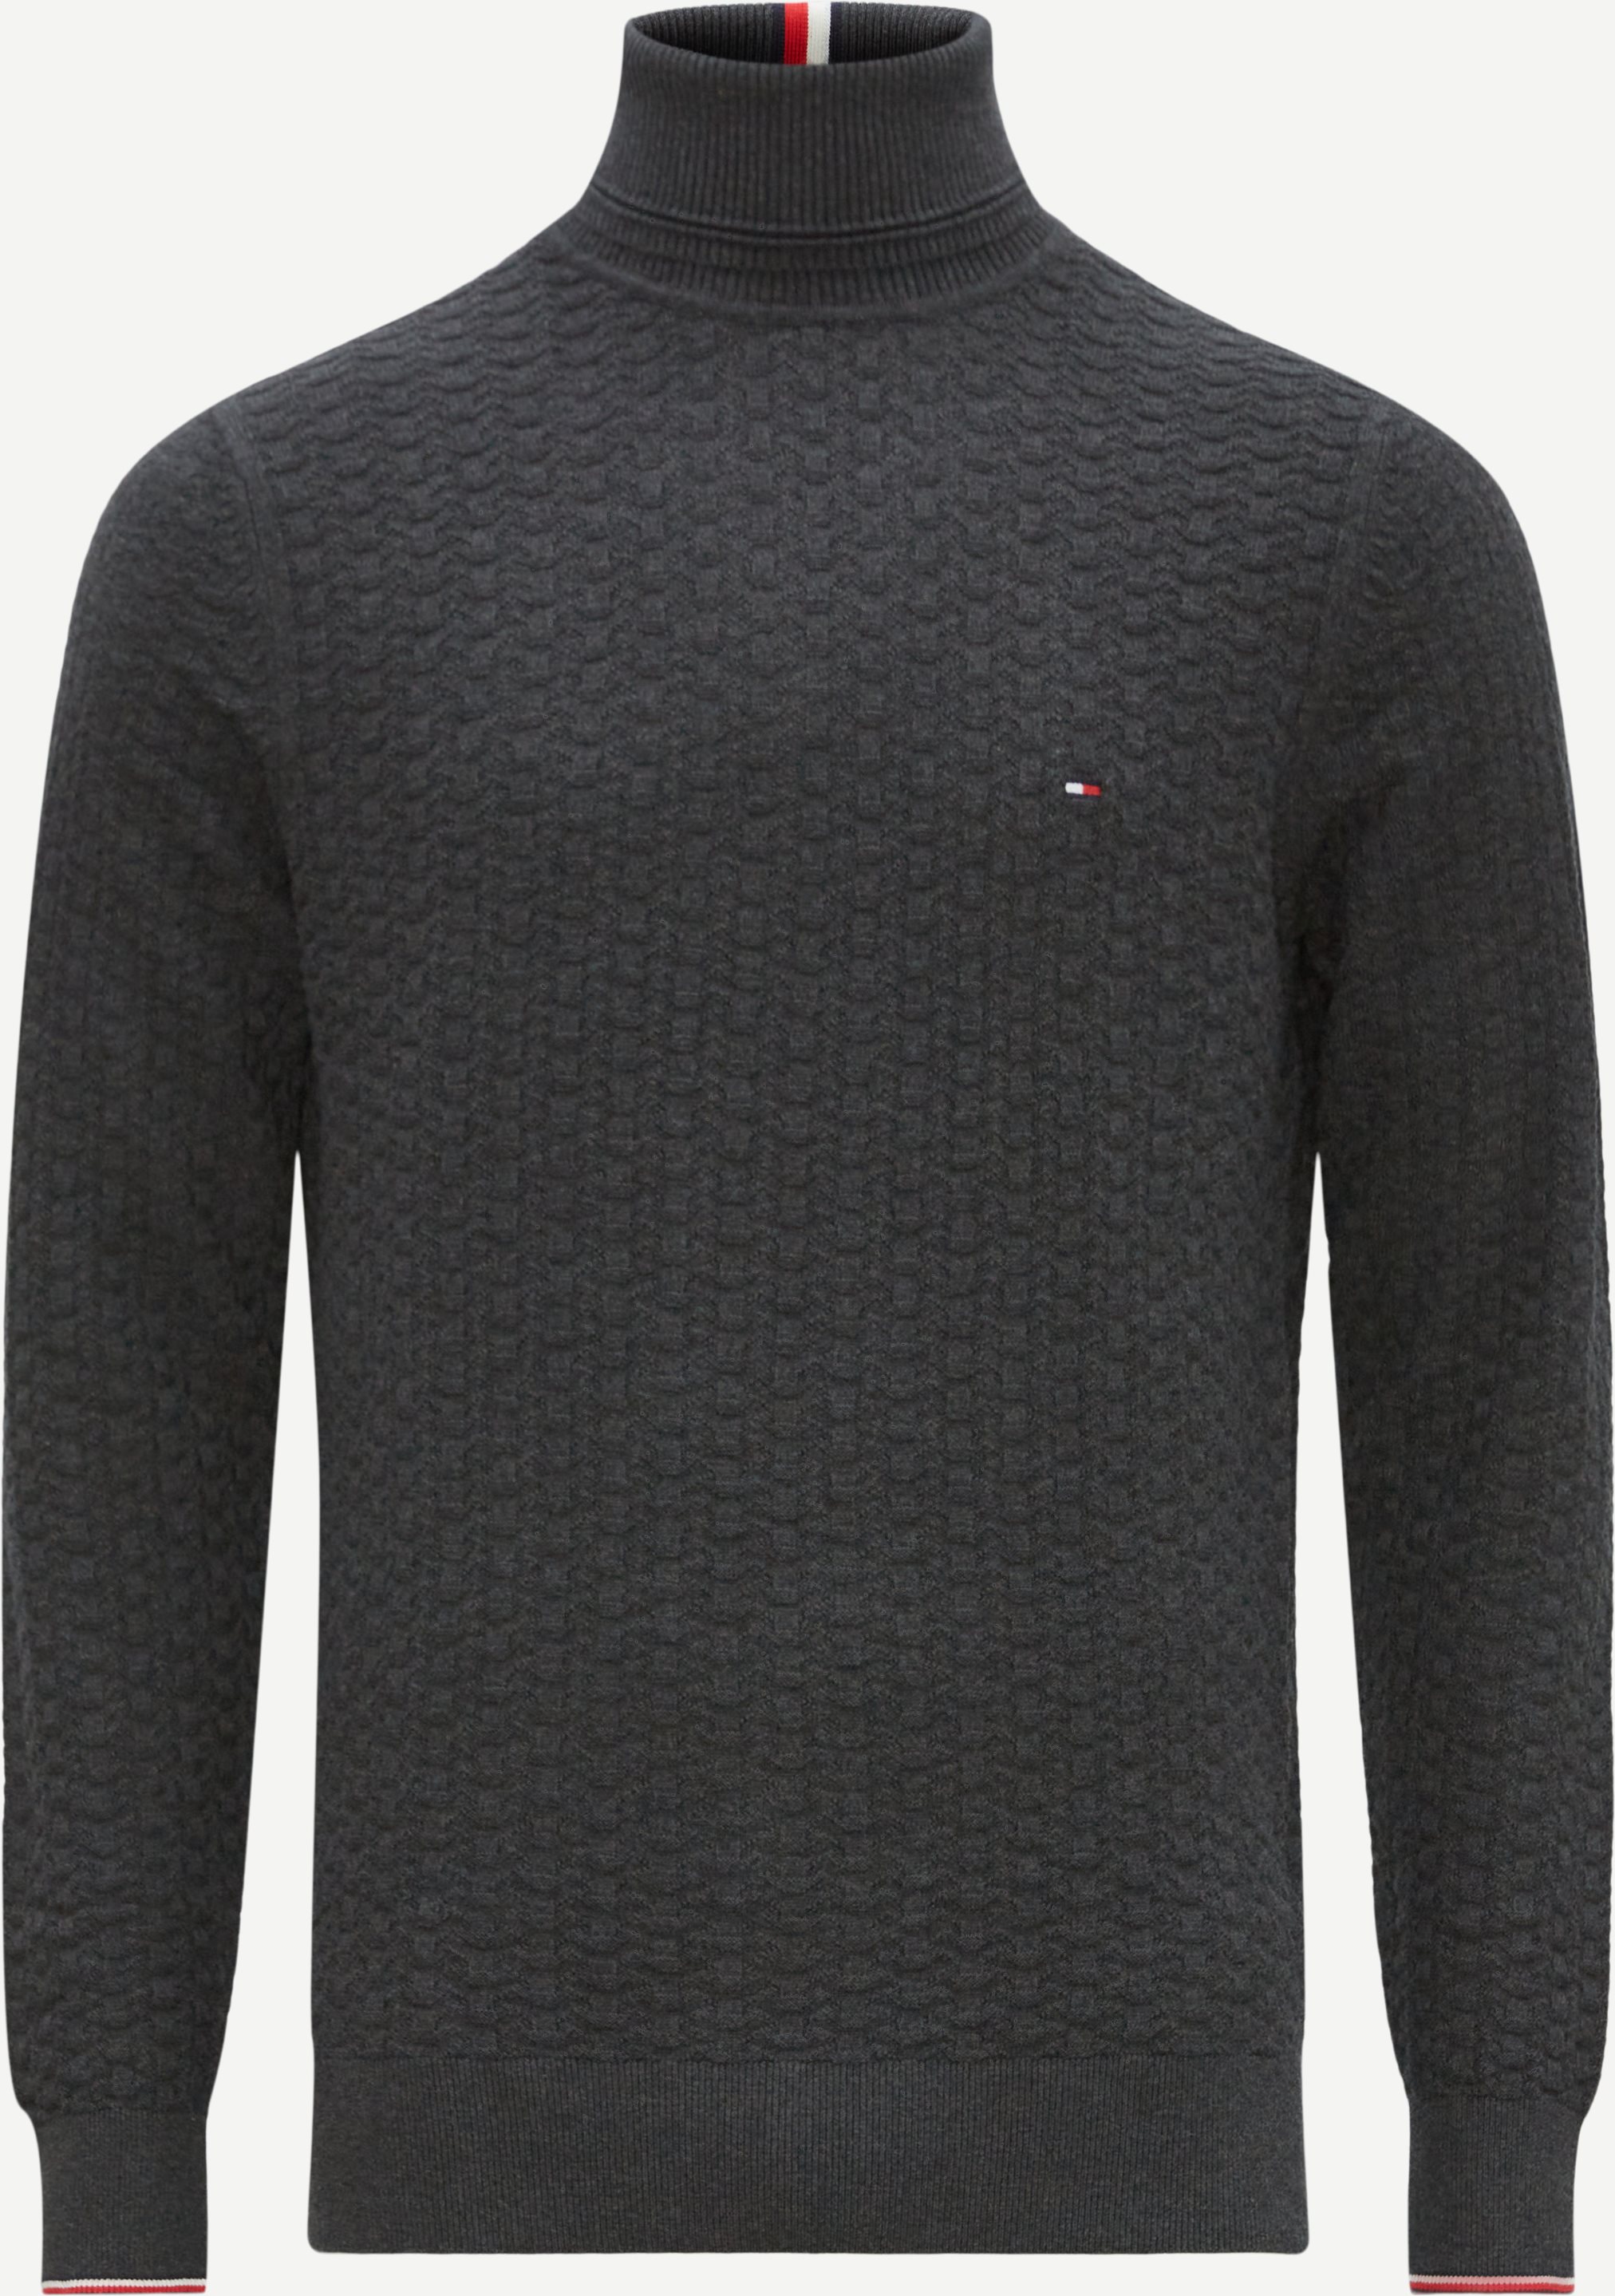 Tommy Hilfiger Knitwear 29109 EXAGGERATED STRUCTURE R Grey